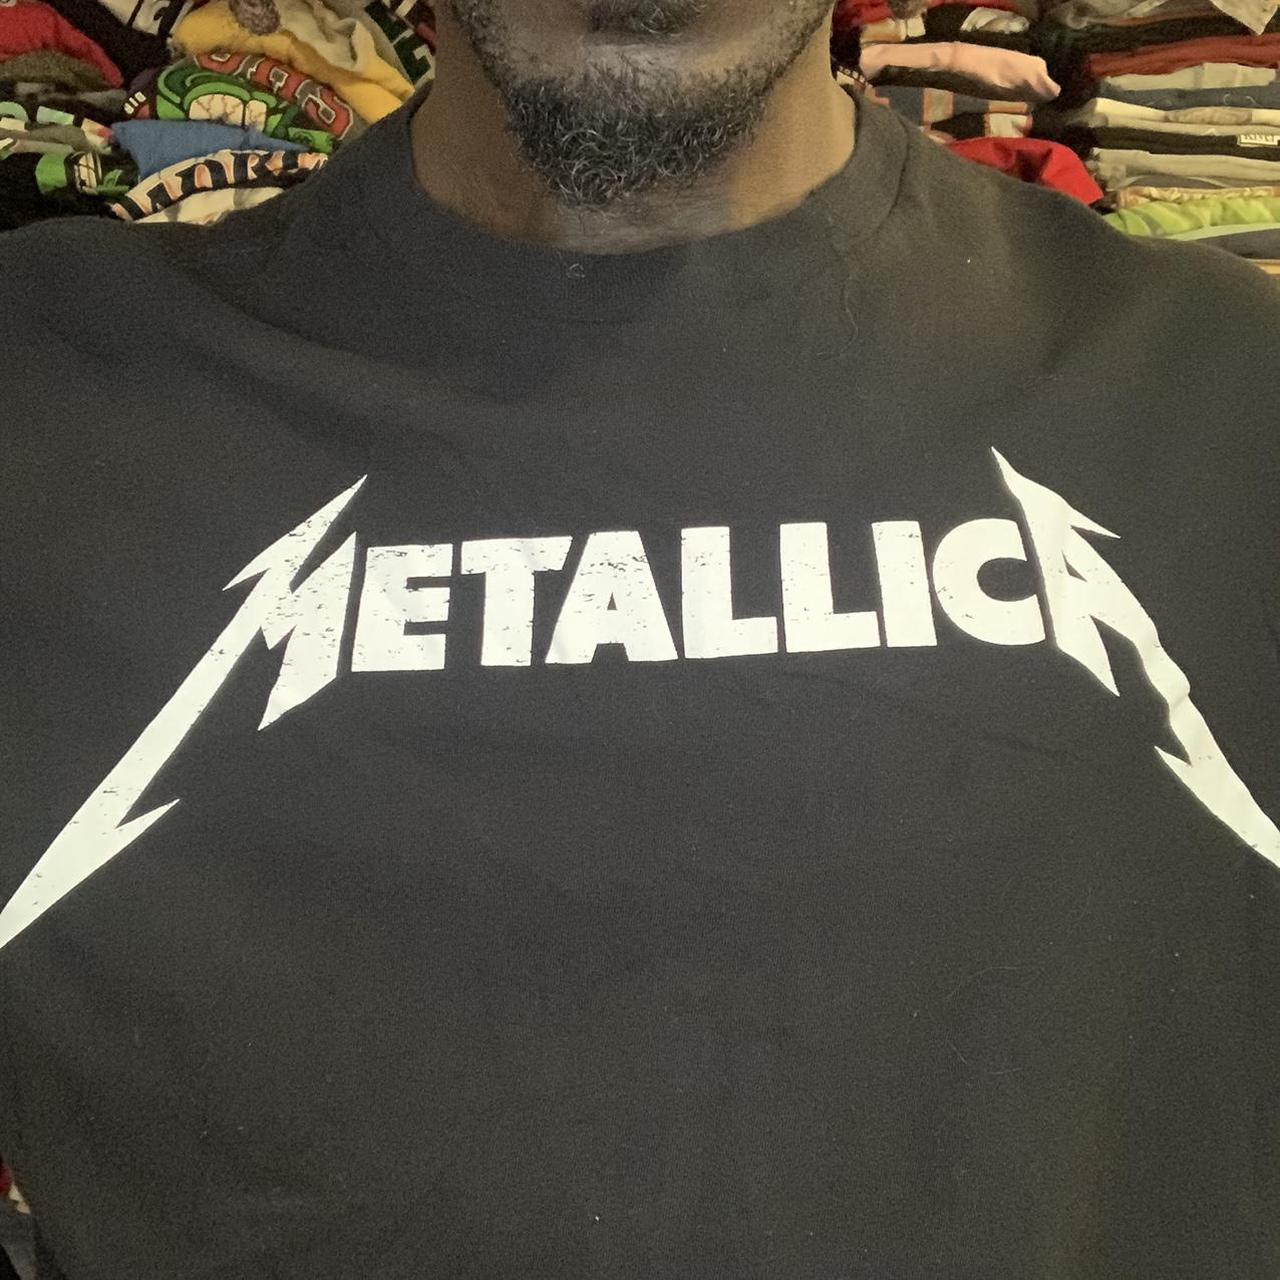 Product Image 2 - L Metallica Band Tee

in great